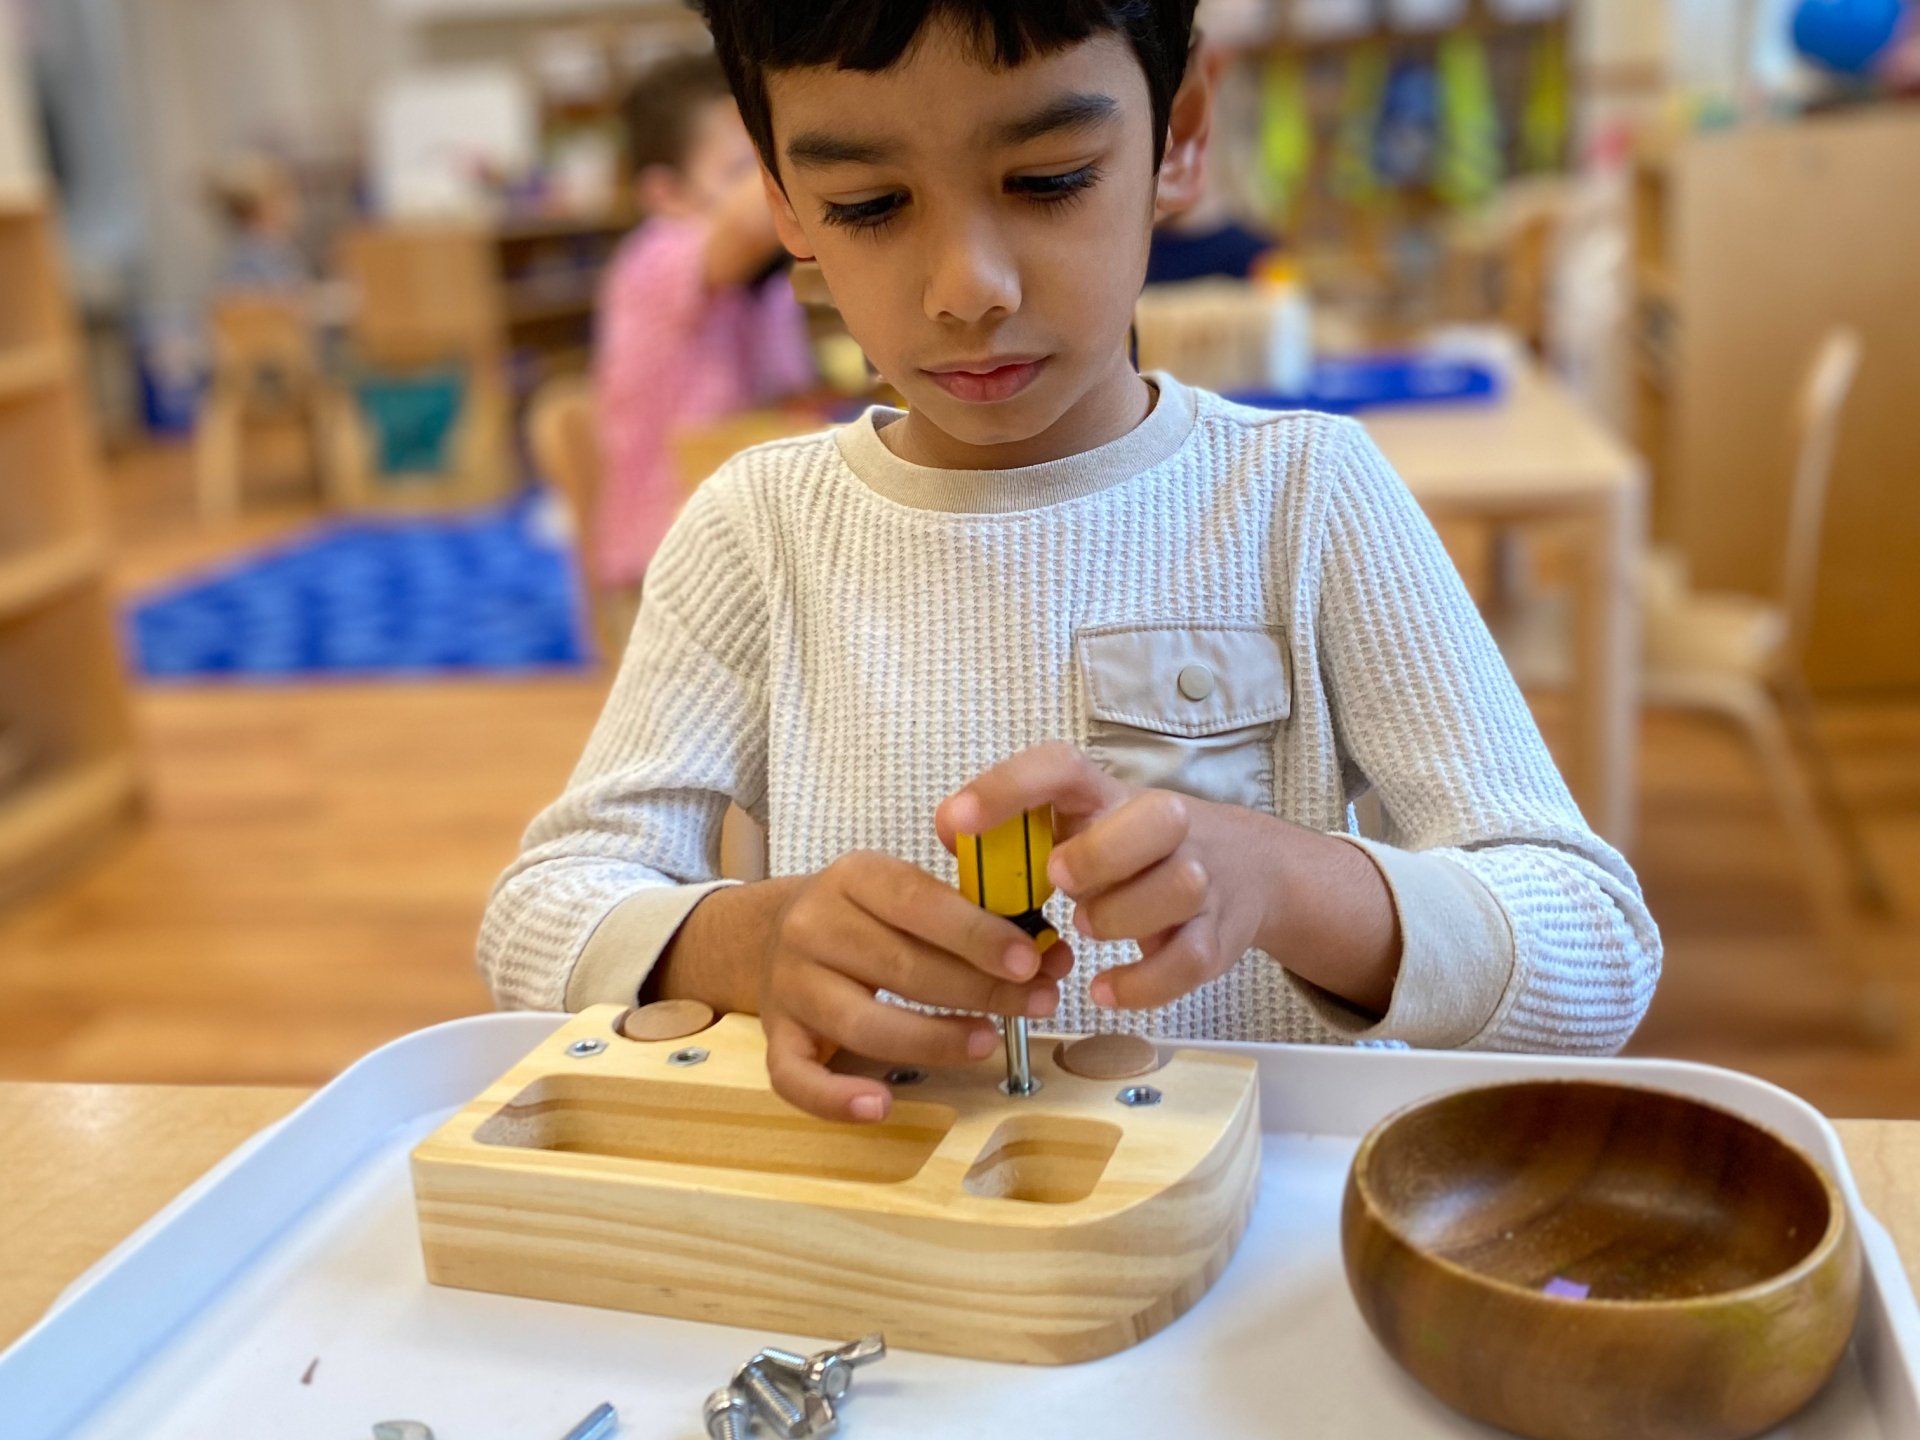 Montessori Child working with practical life materials